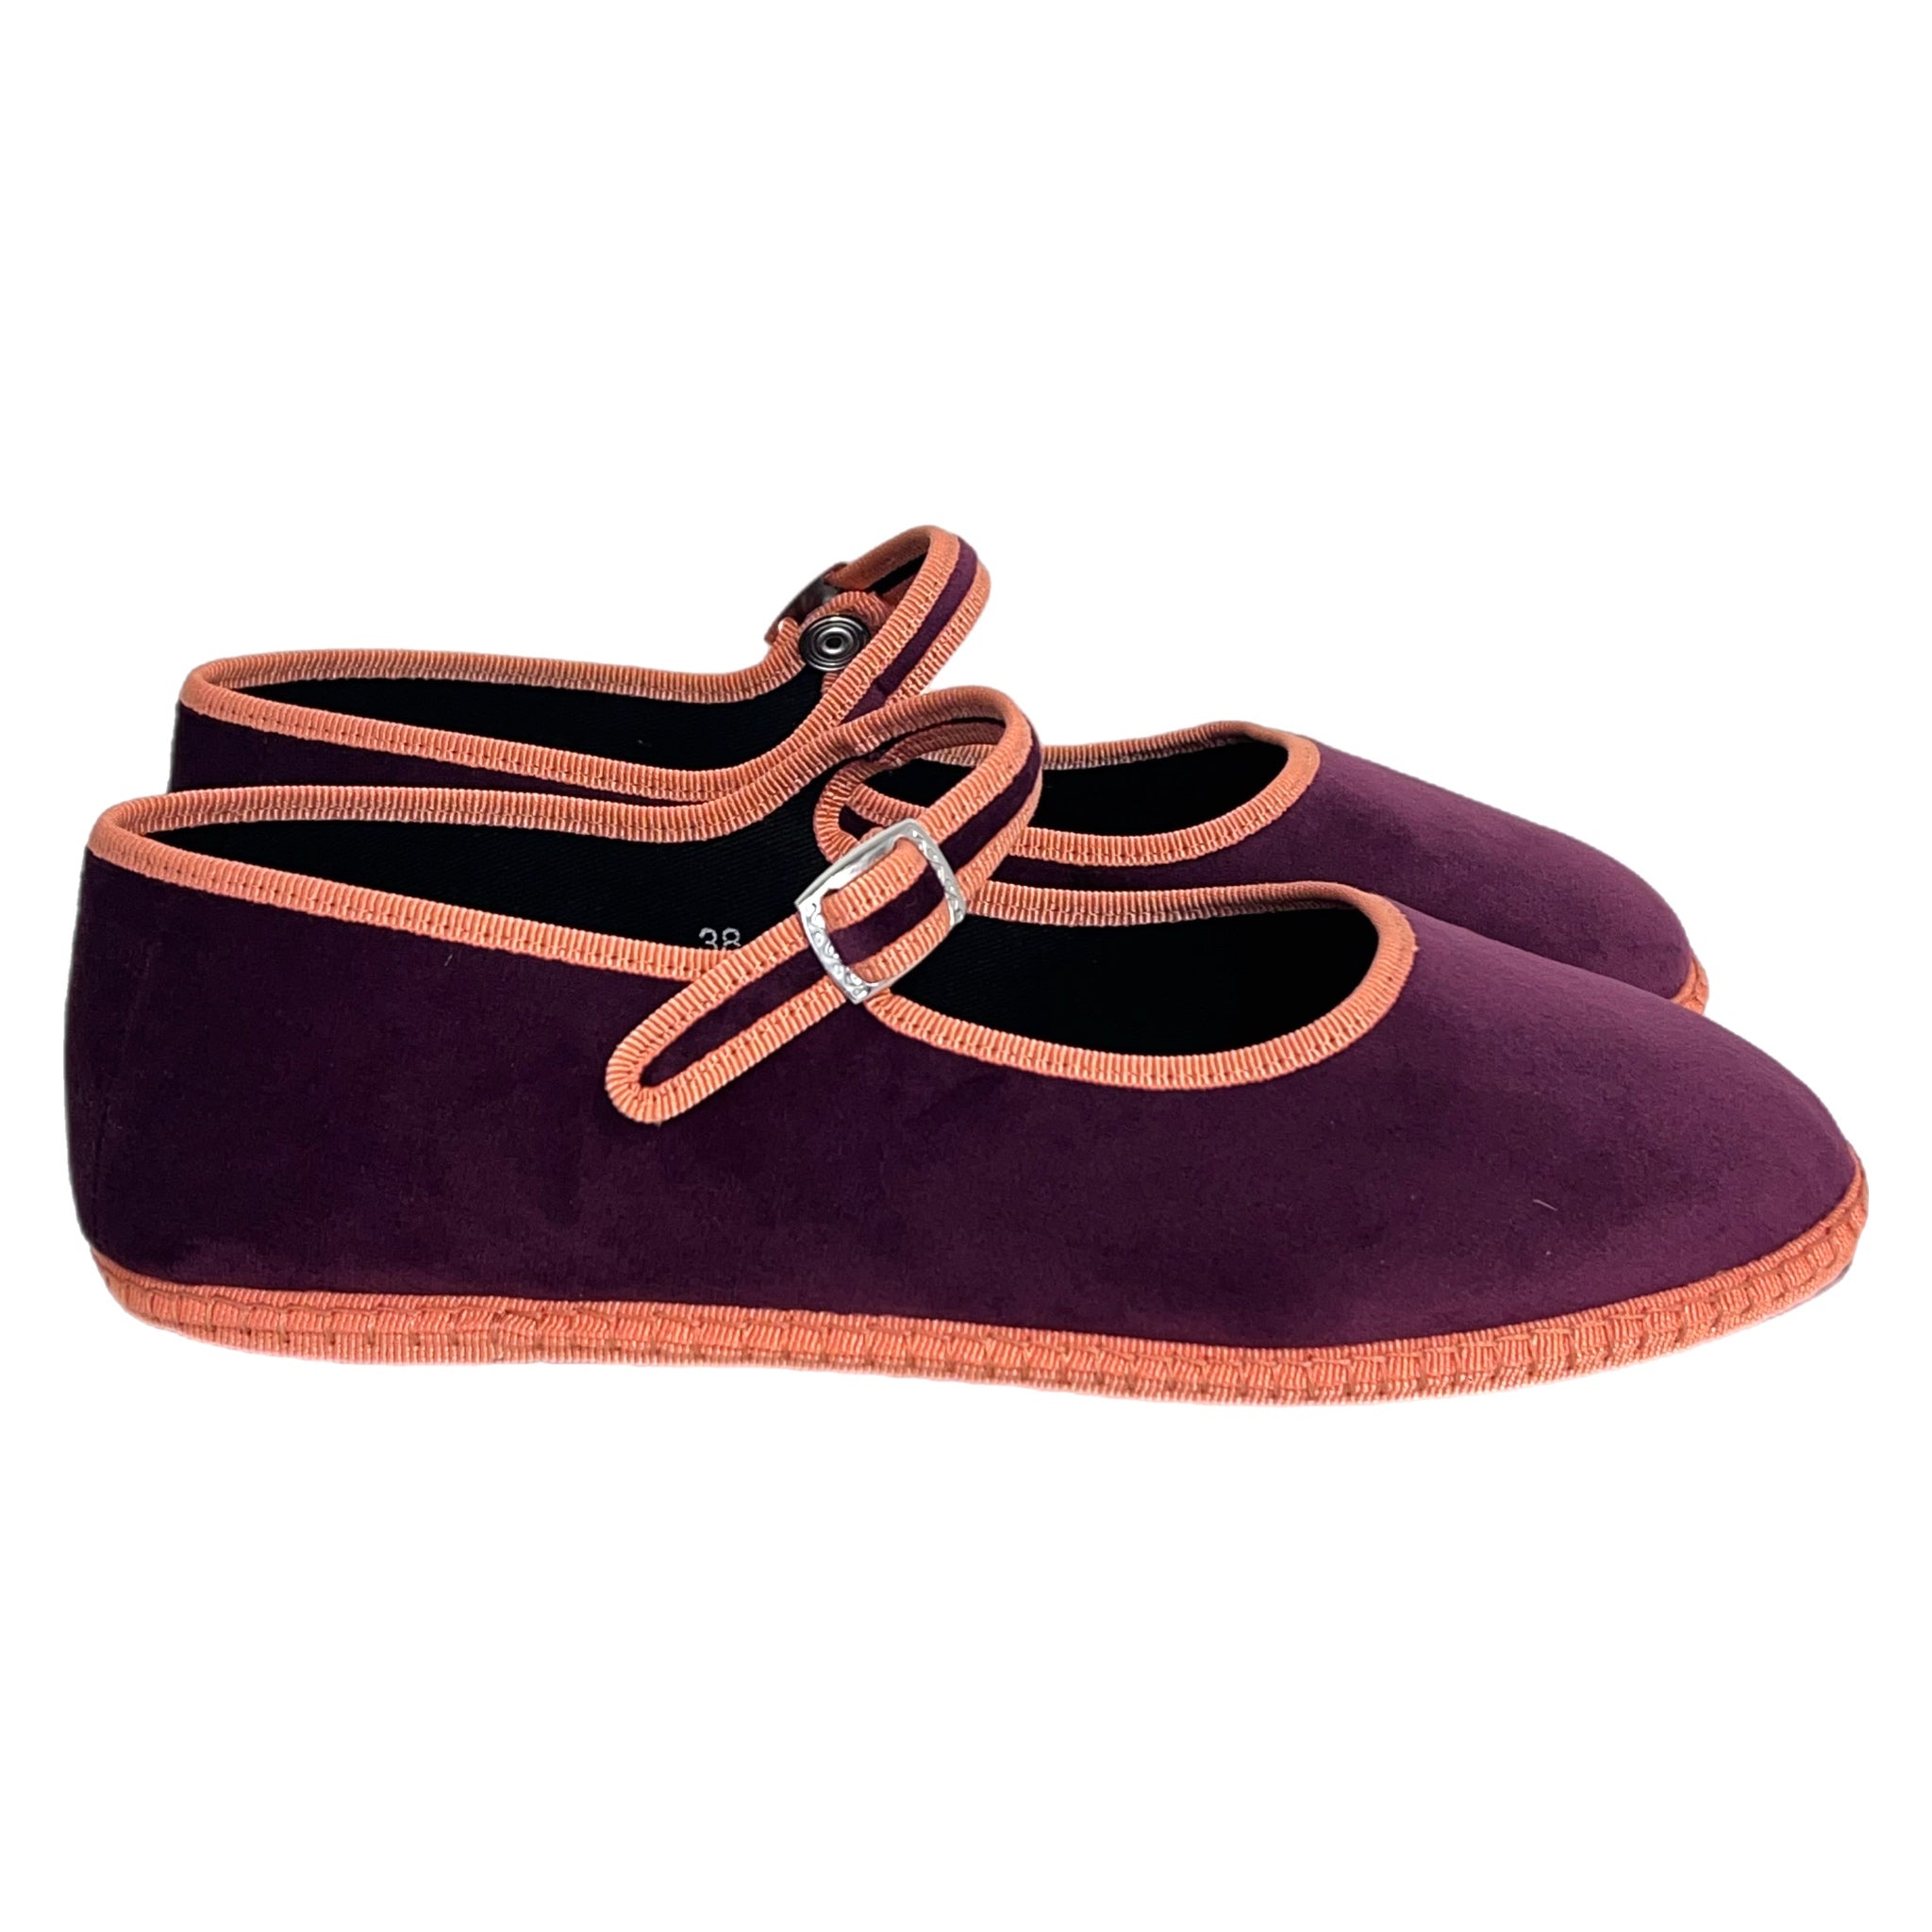 Purple and peach velvet baby Friulane shoes with handmade rubber soles, elegant and authentic design, made in Friuli, Italy.